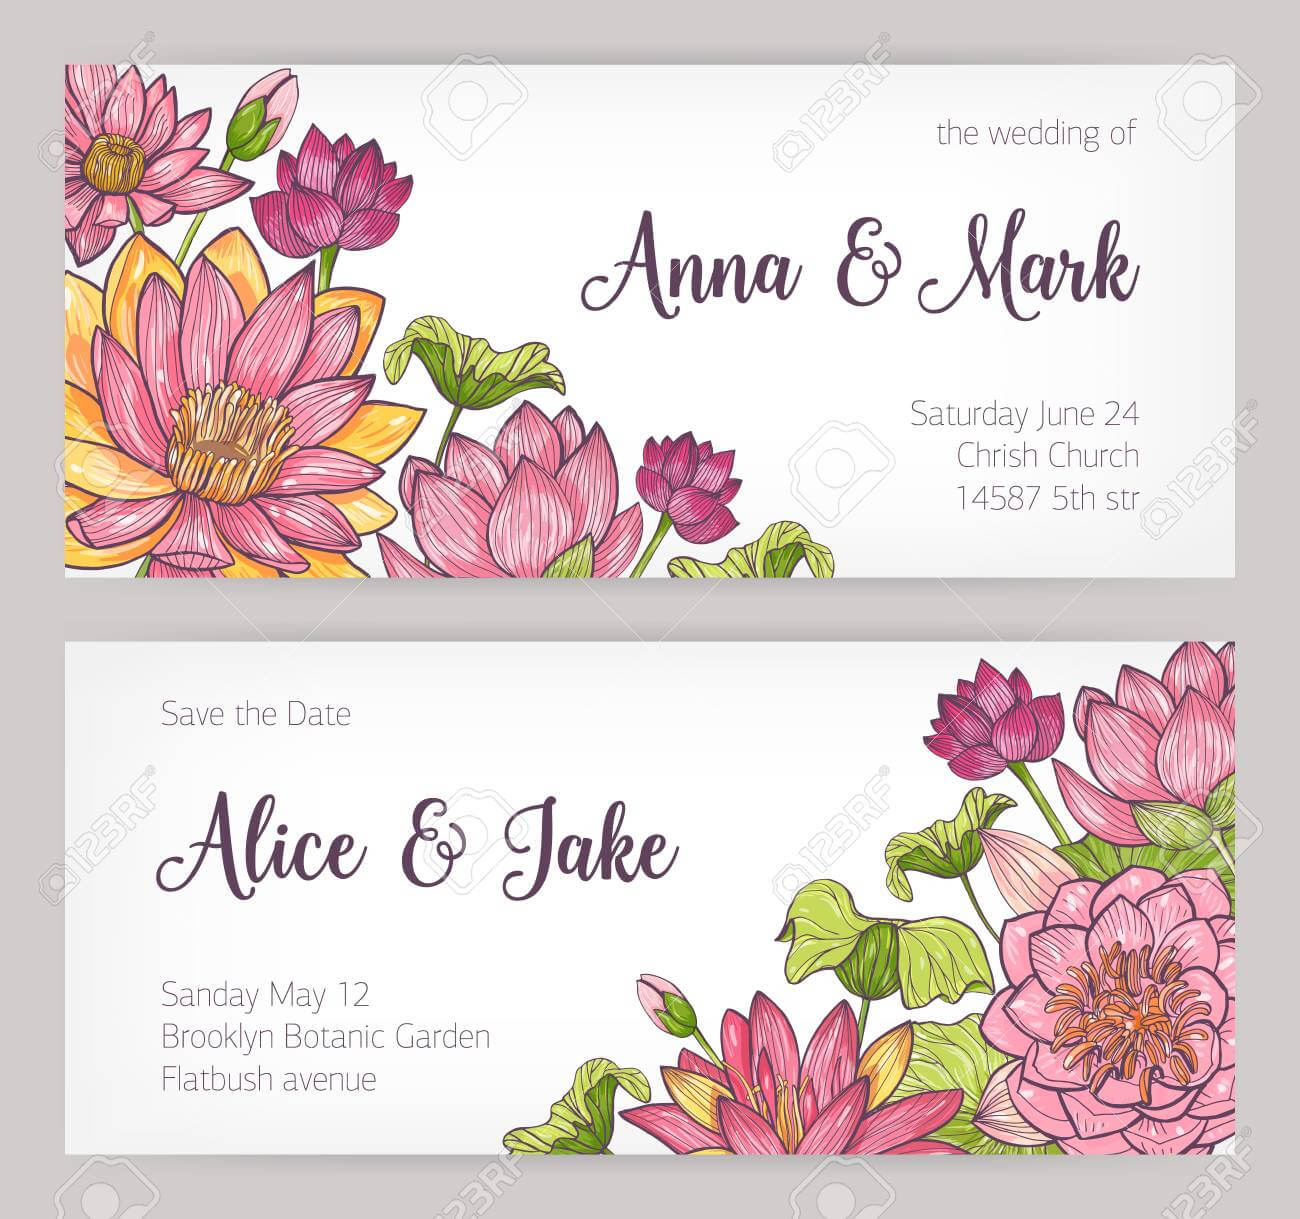 Wedding Invitation And Save The Date Card Templates Decorated.. Inside Save The Date Cards Templates